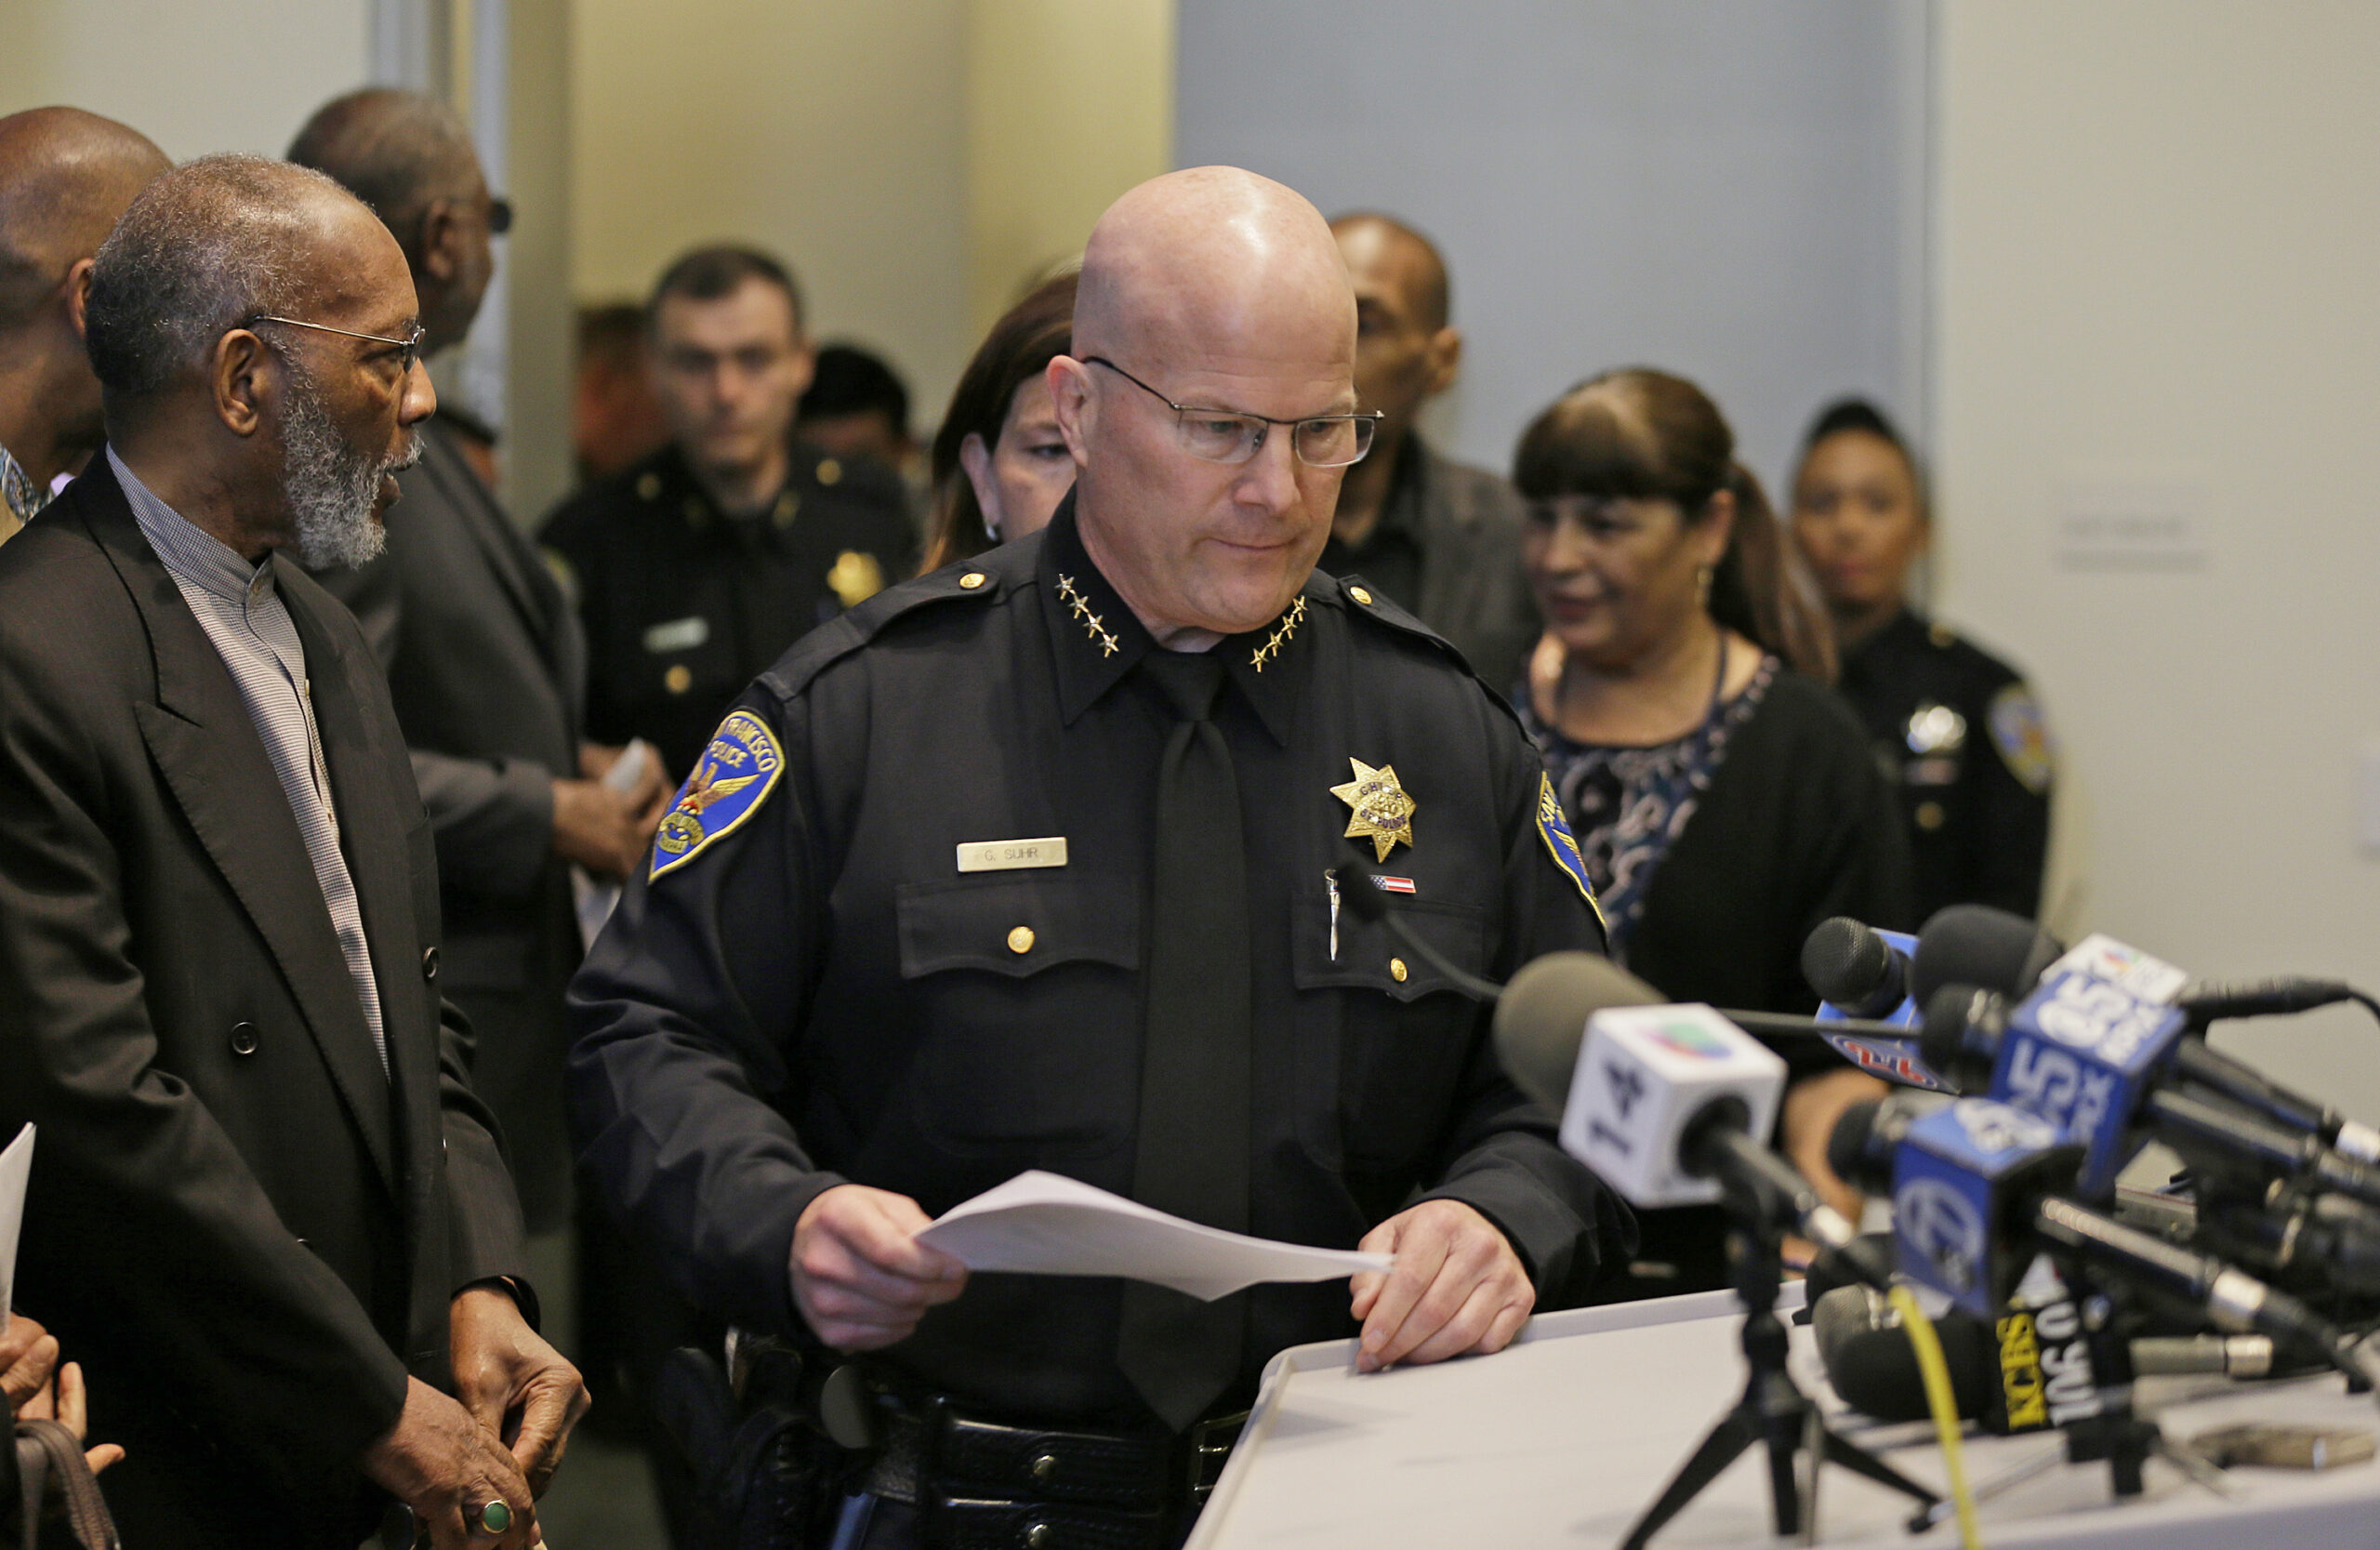 Catching Cops’ Racist Texts: Easier Said Than Done in SF